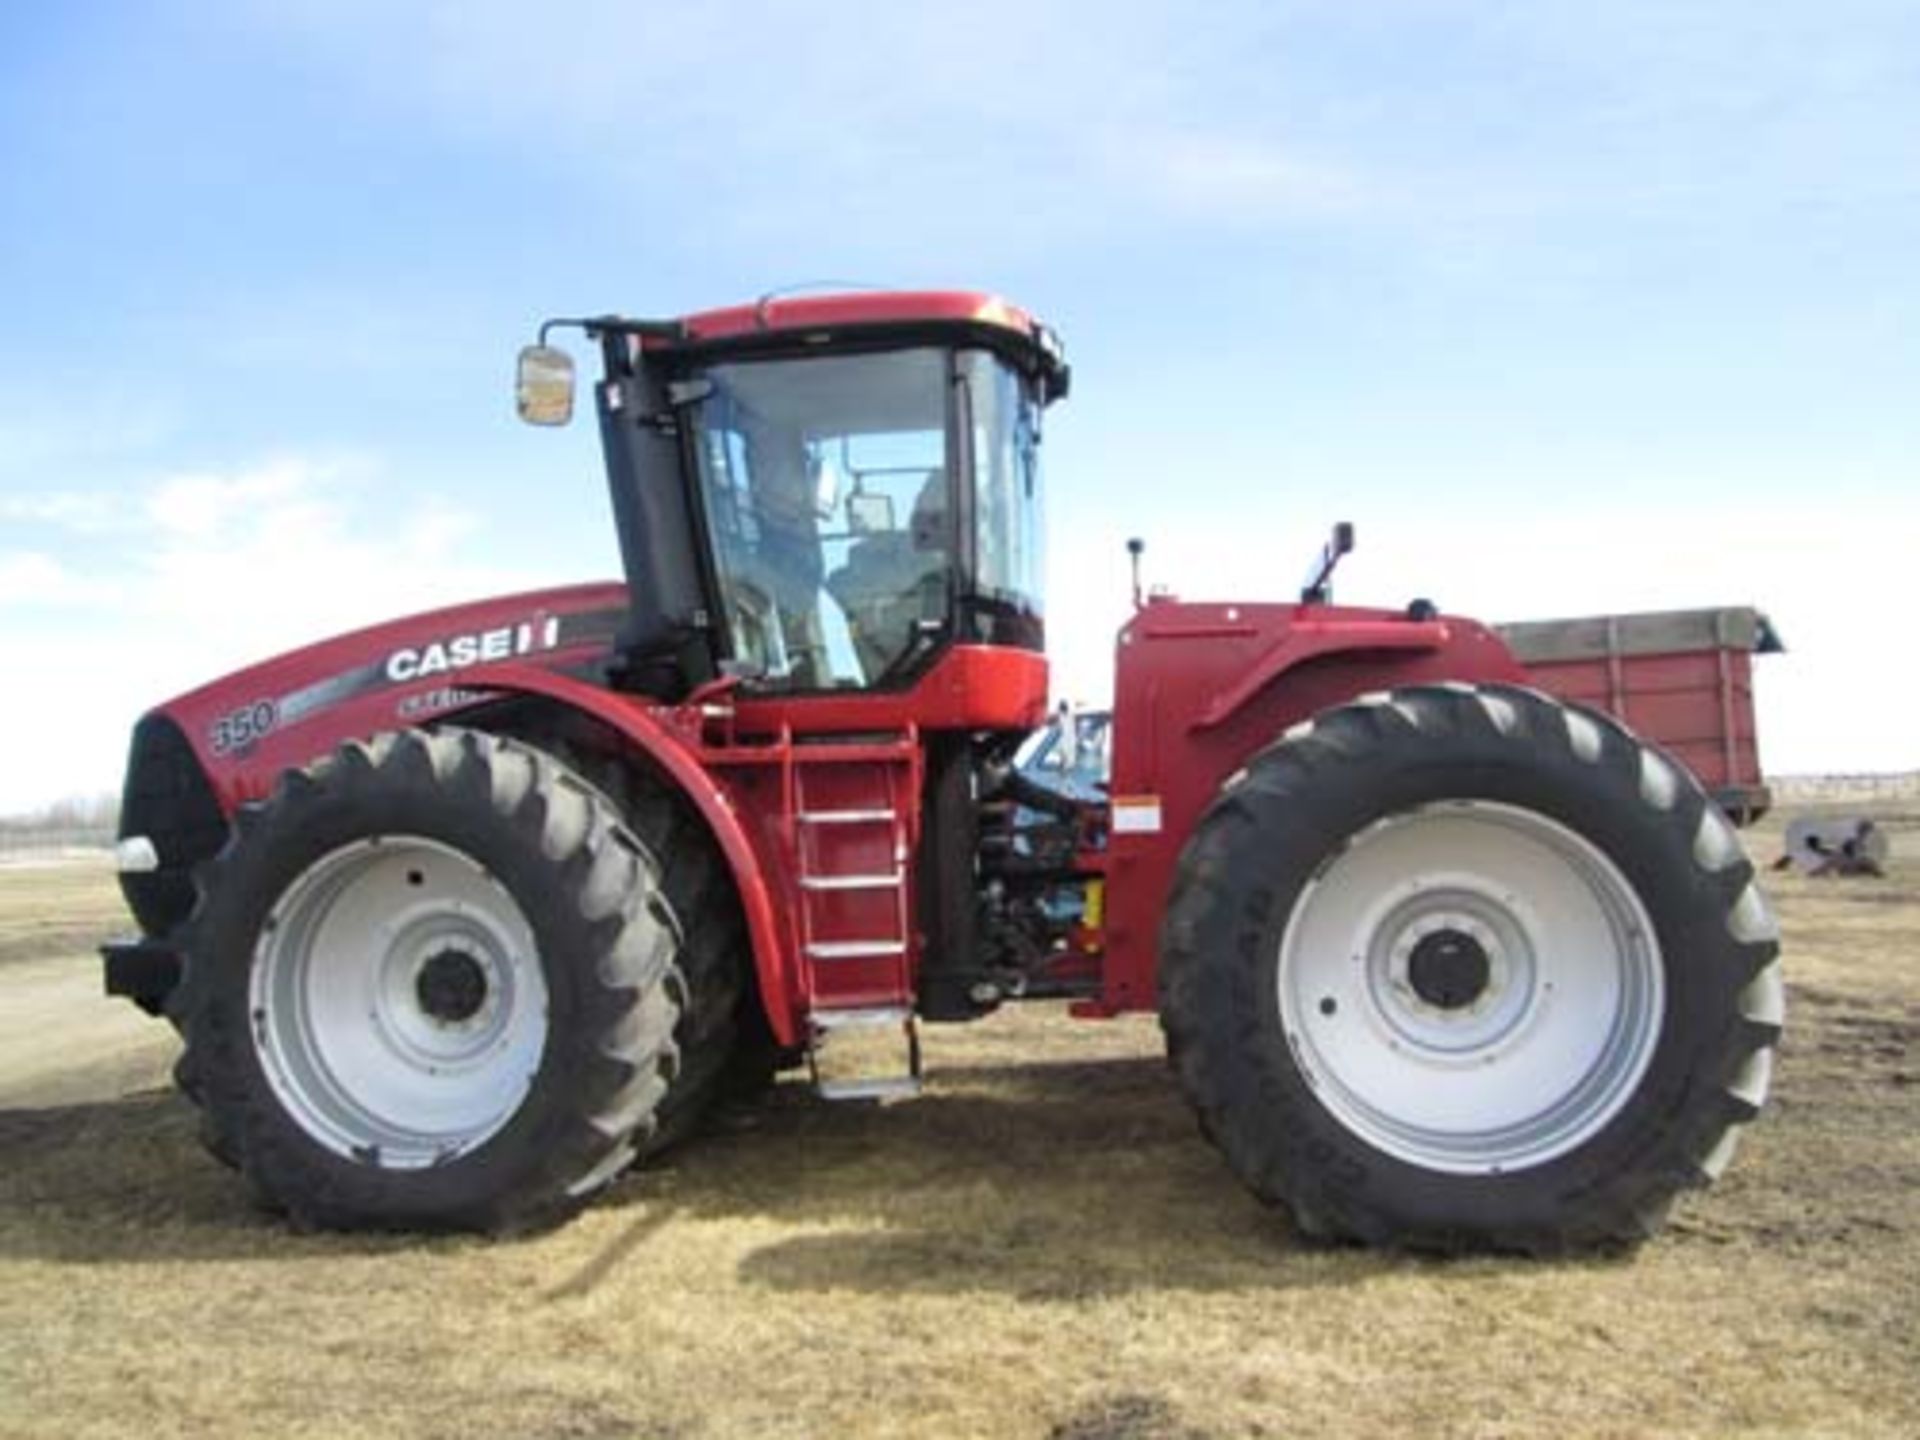 2011 CASE IH Steiger 350 HD 4wd Tractor - Image 3 of 11